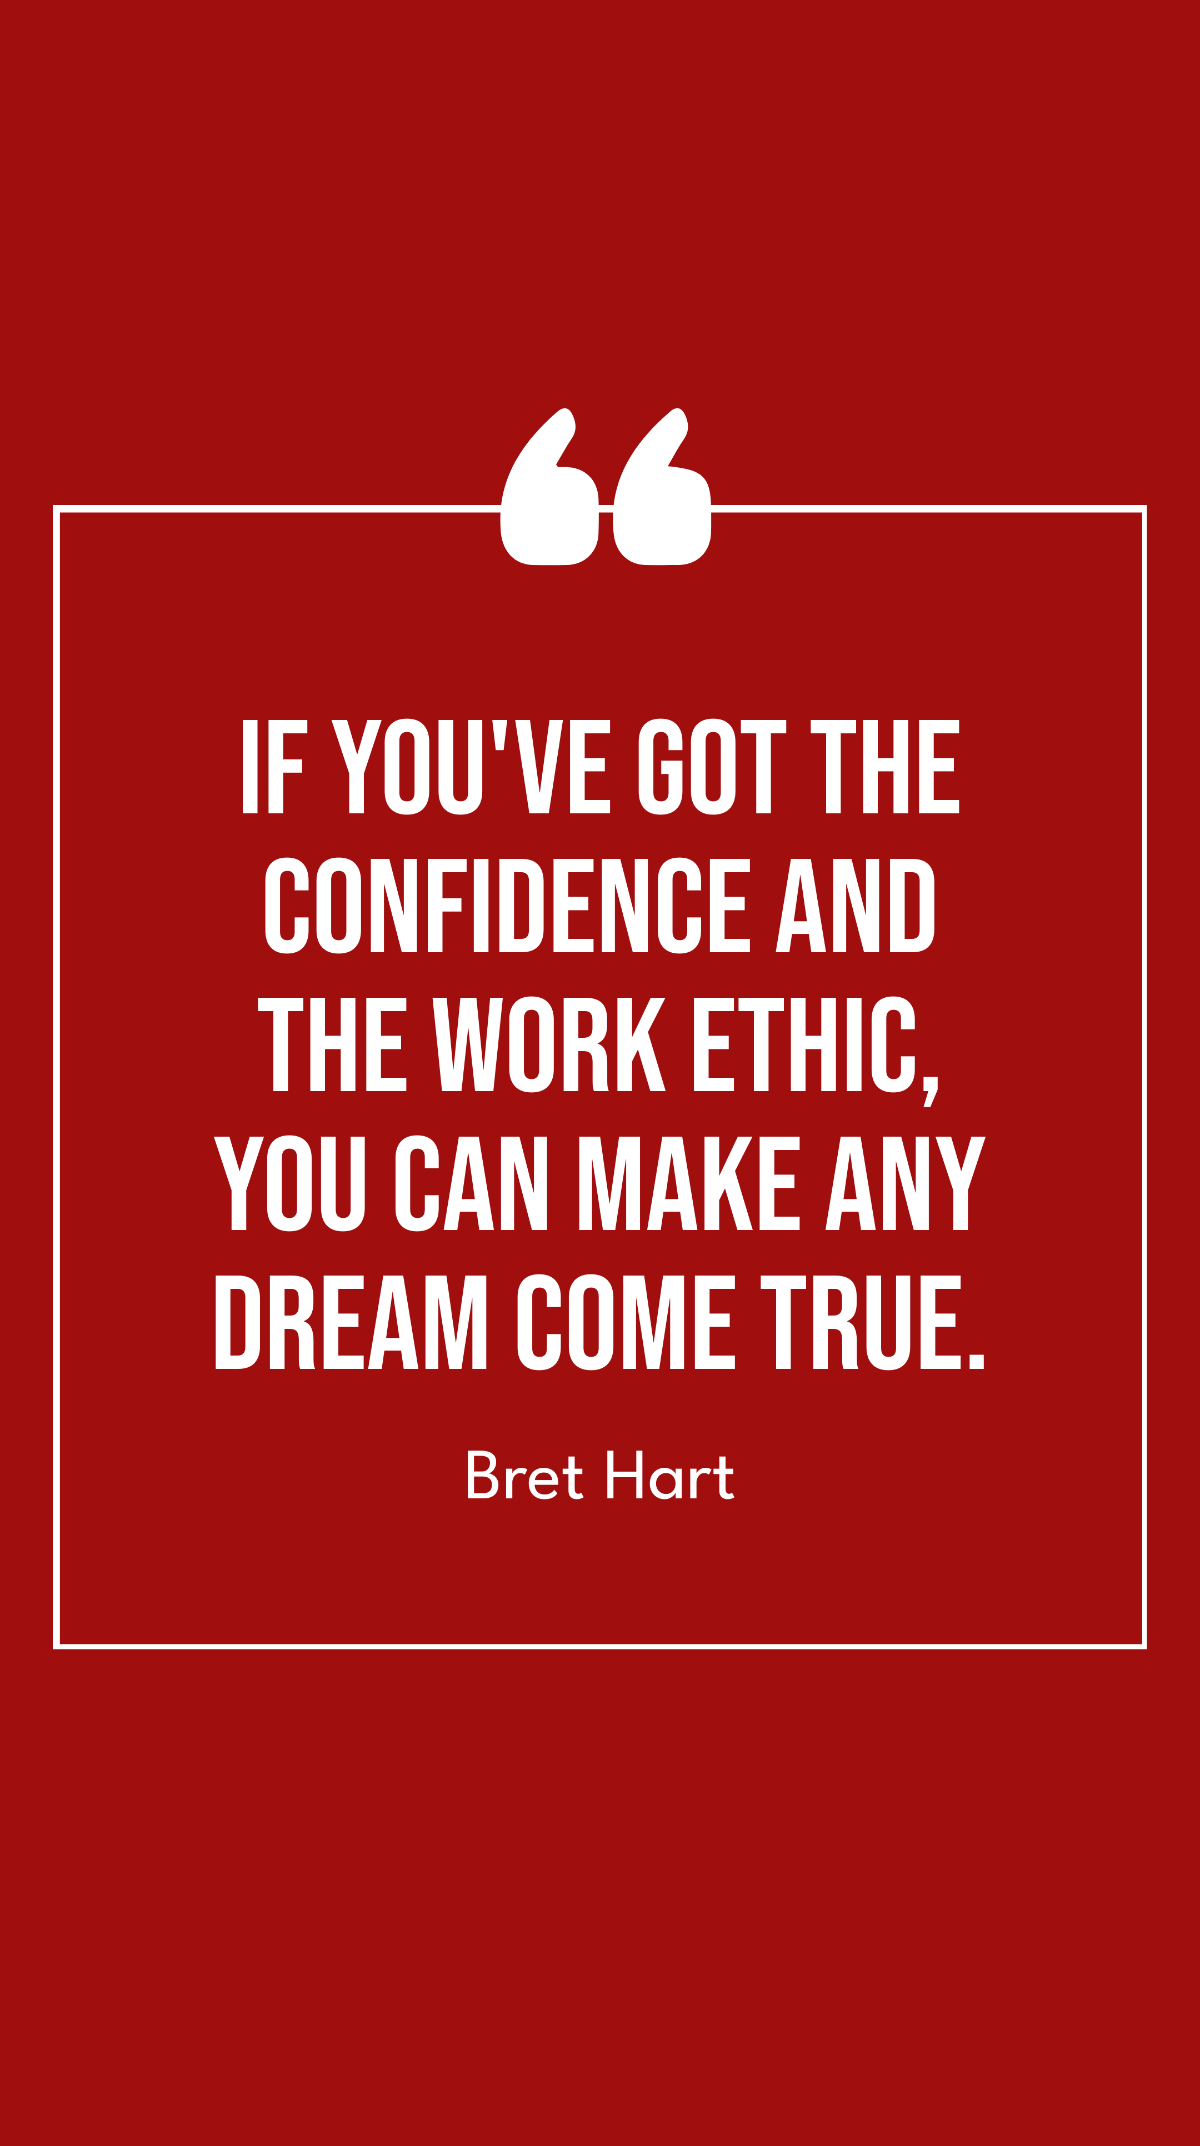 Free Bret Hart - If you've got the confidence and the work ethic, you can make any dream come true. Template